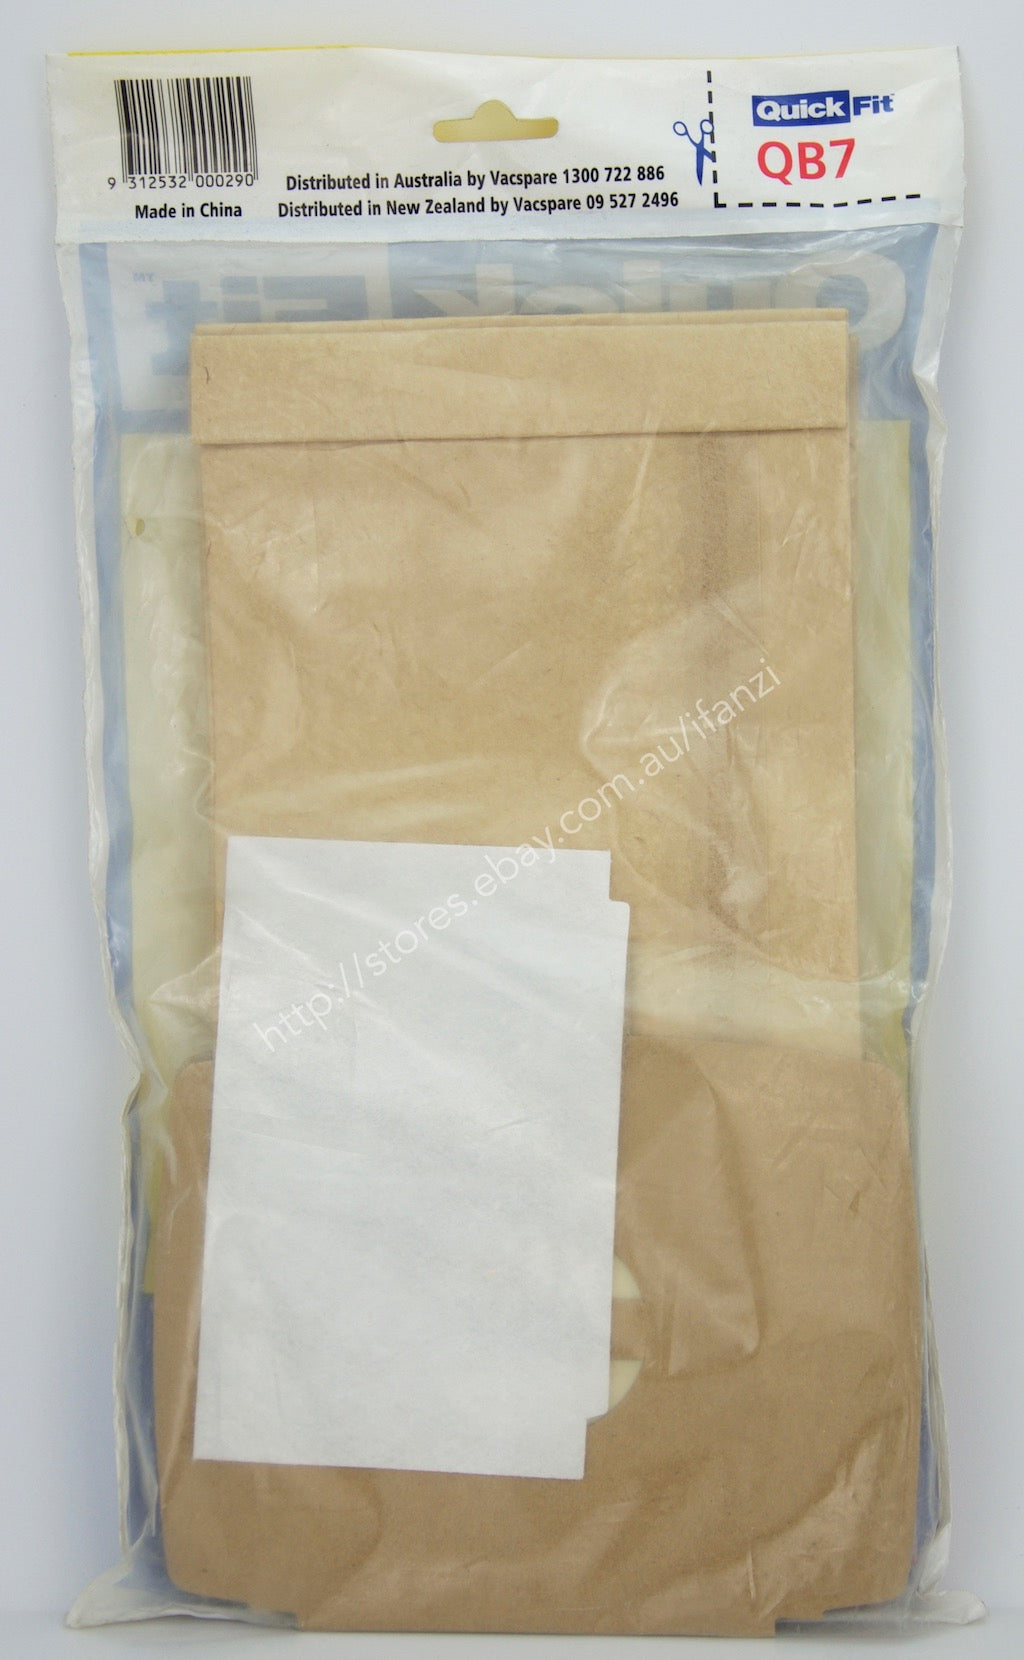 QuickFit Vacuum Cleaner Bags For Electrolux 5 Bags With Filter QB7